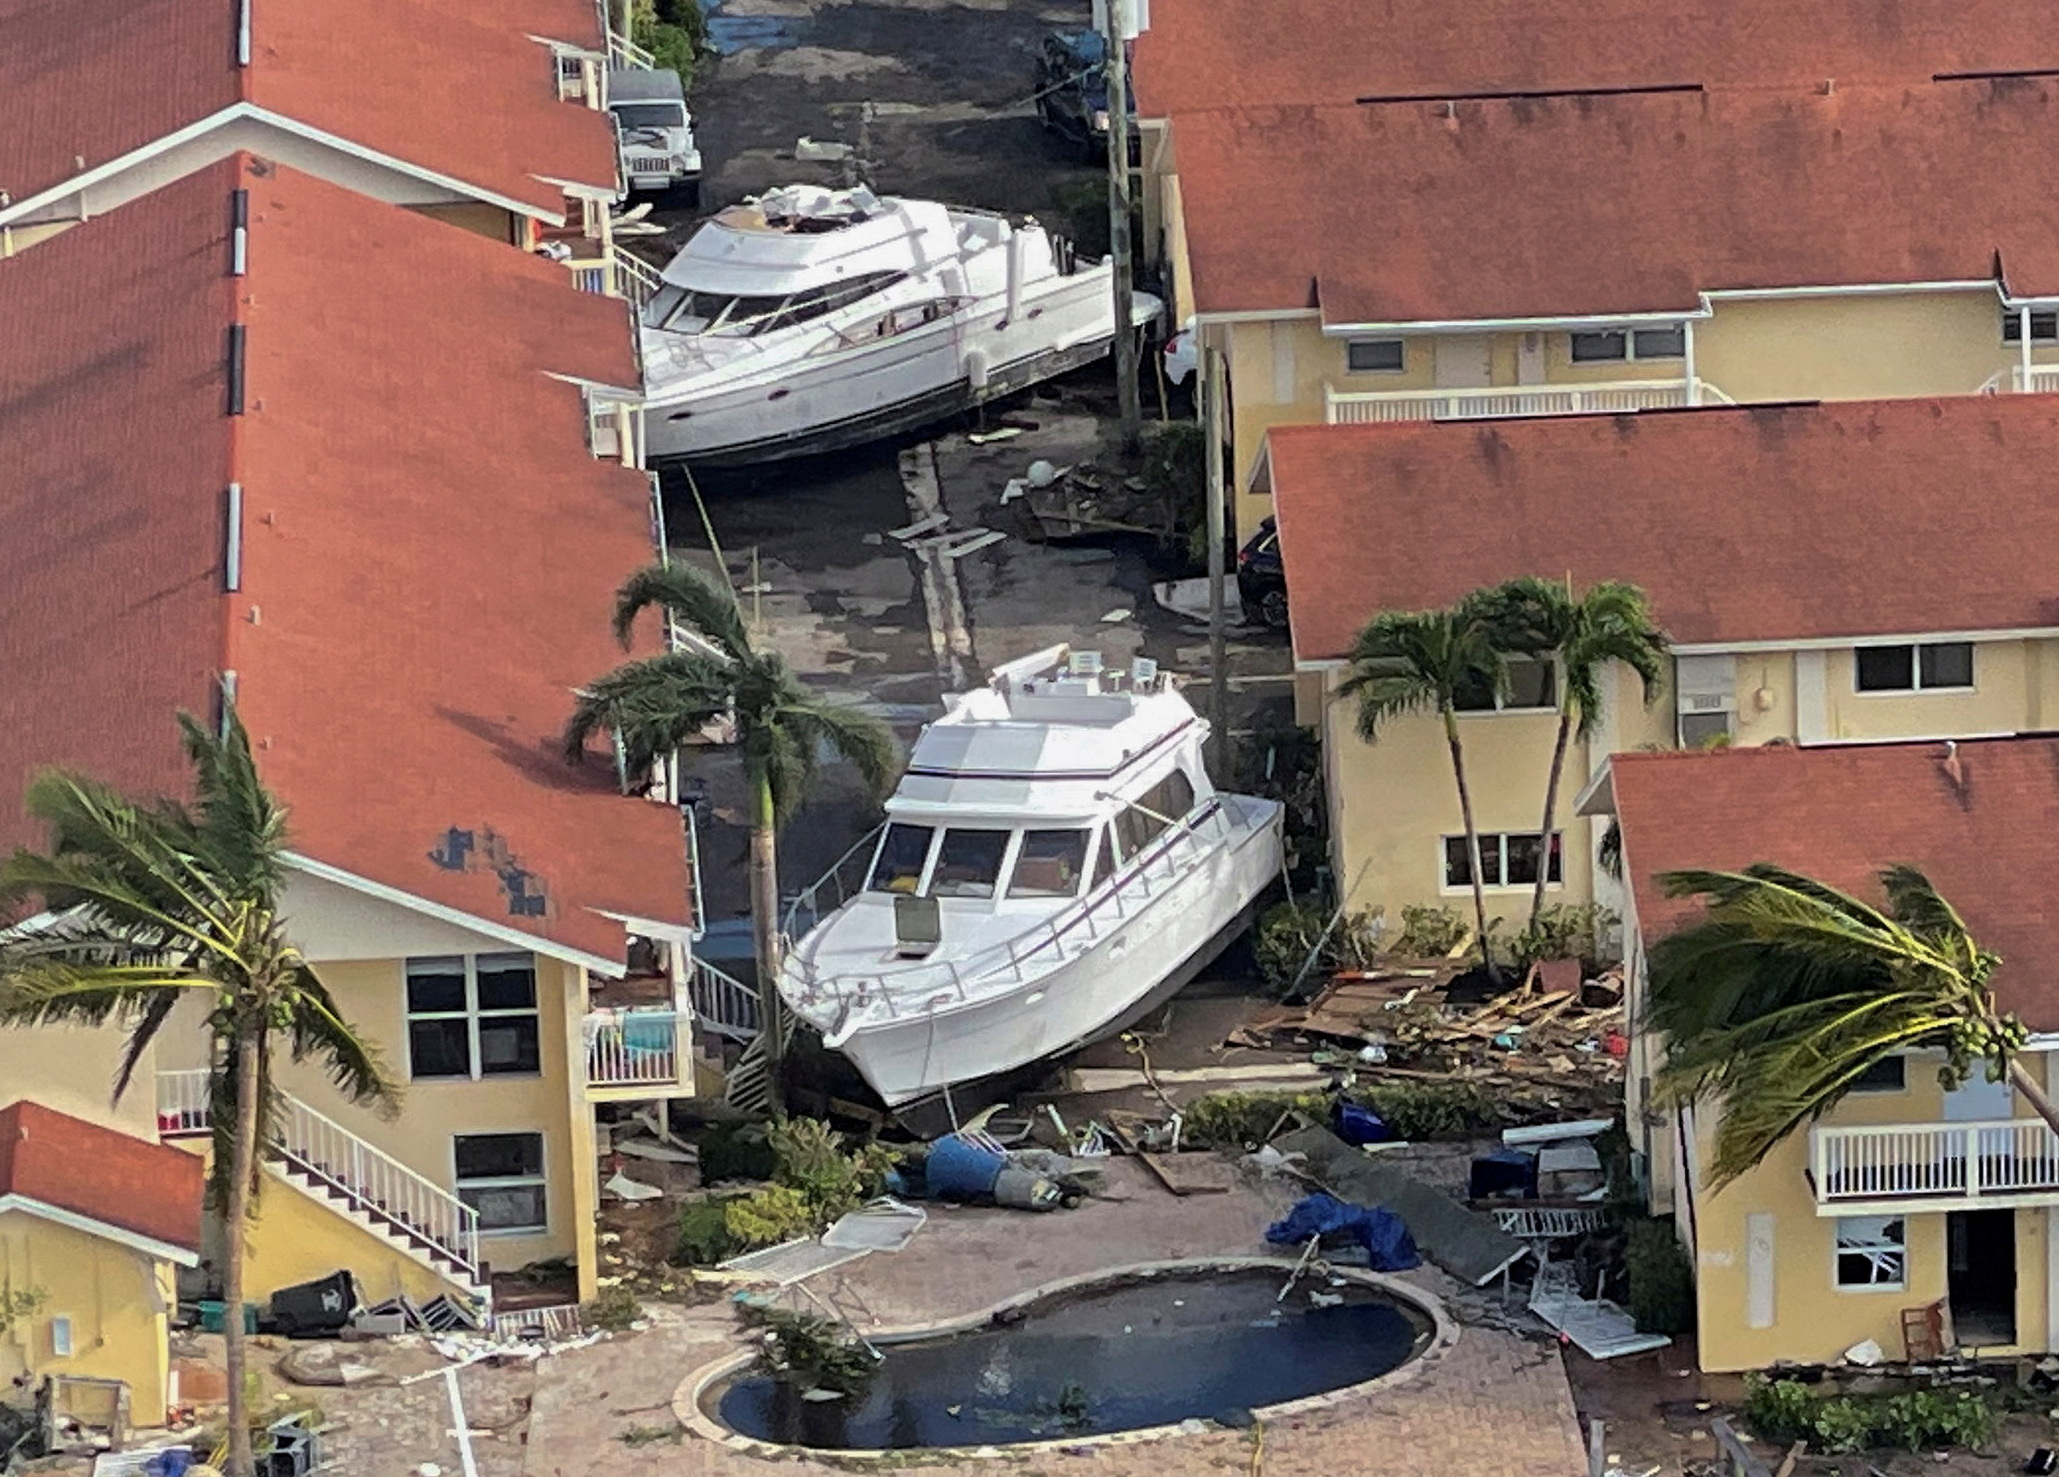 hurricane damaged yachts for sale in florida